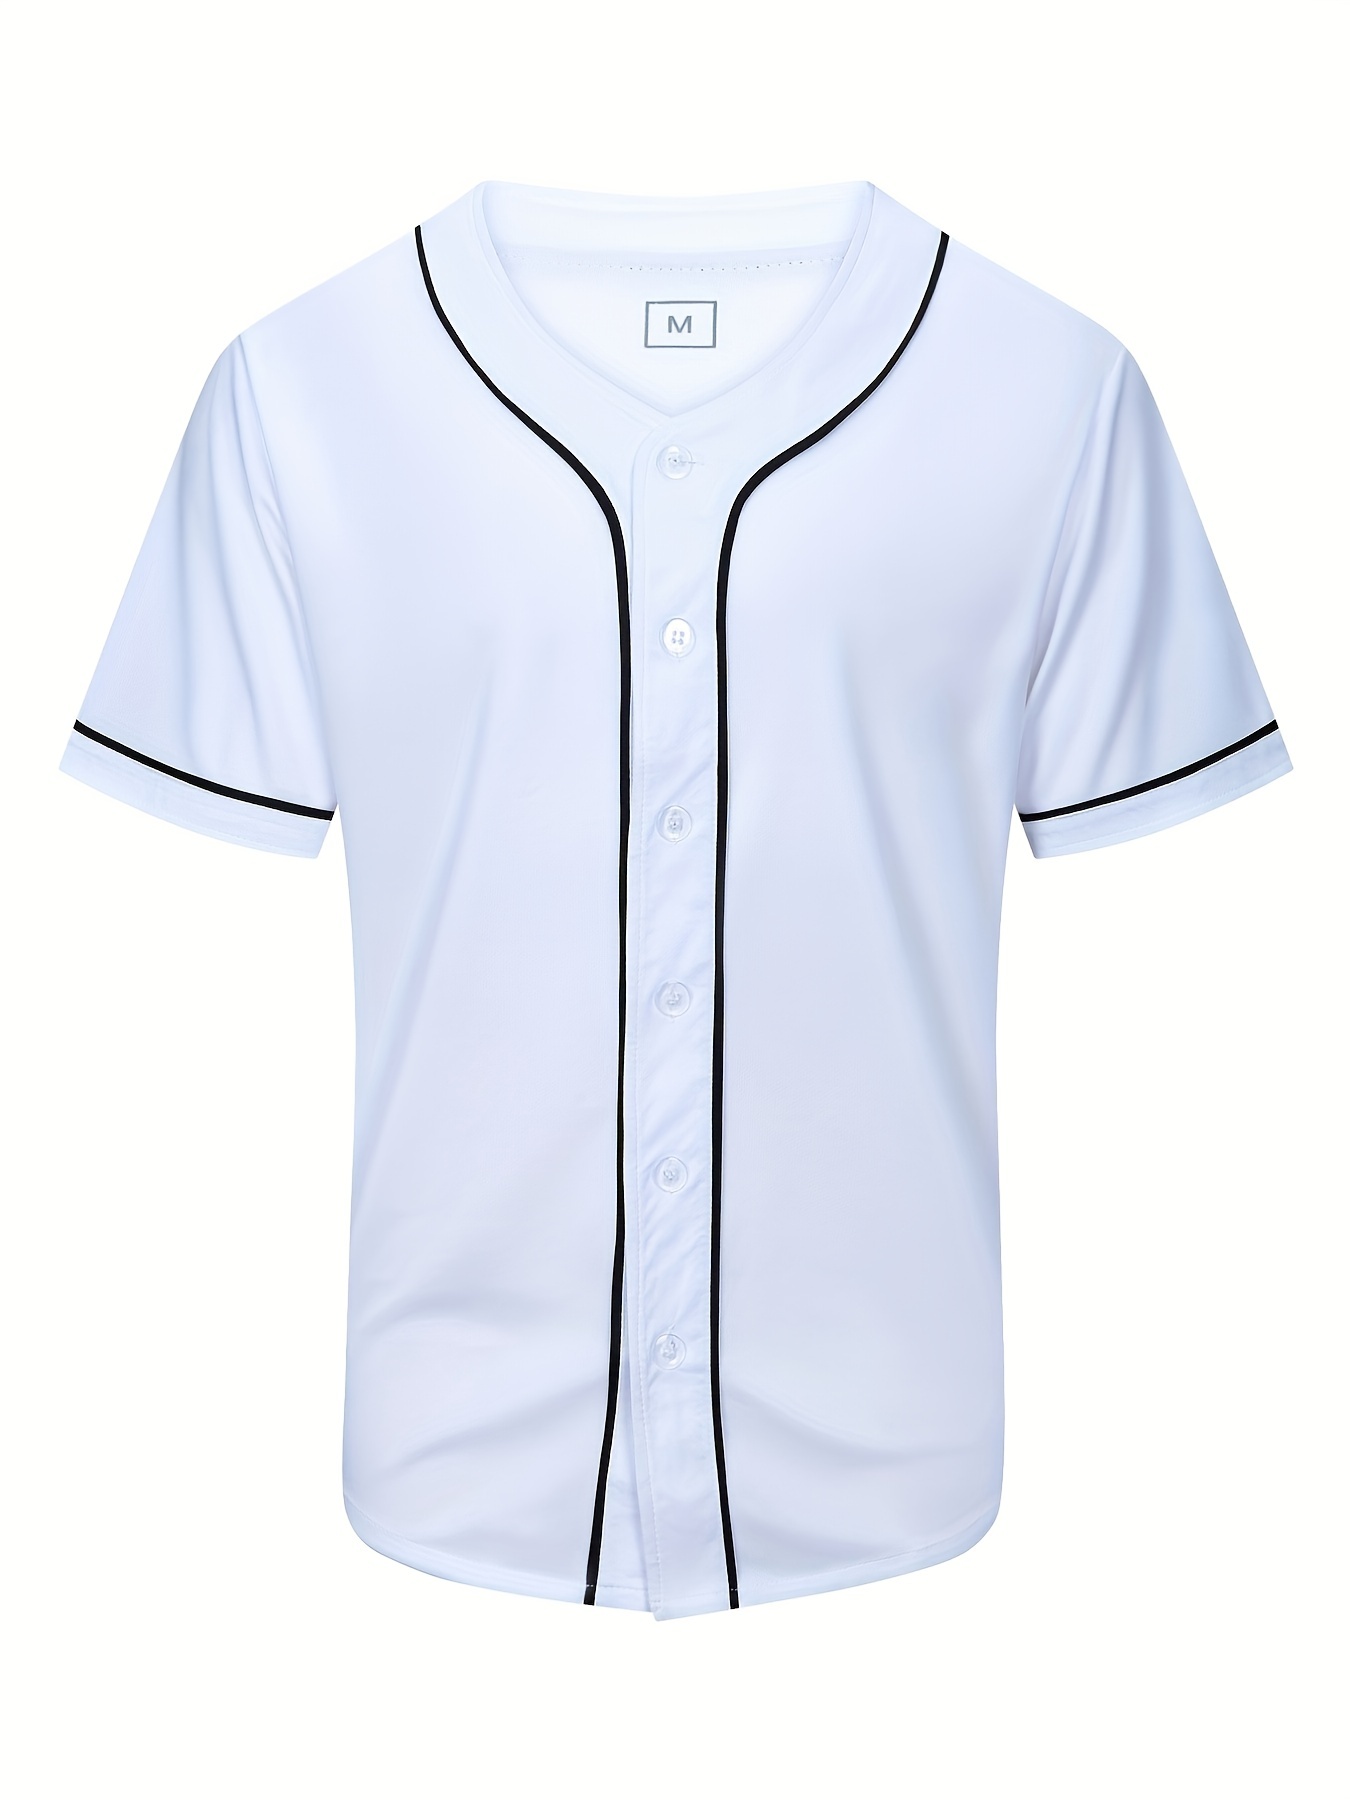 Men's Hip Hop Baseball Jersey, Active Slightly Stretch Button Up Short Sleeve Uniform Baseball Shirt for Party Gifts,Breathable, Quick Dry,Temu